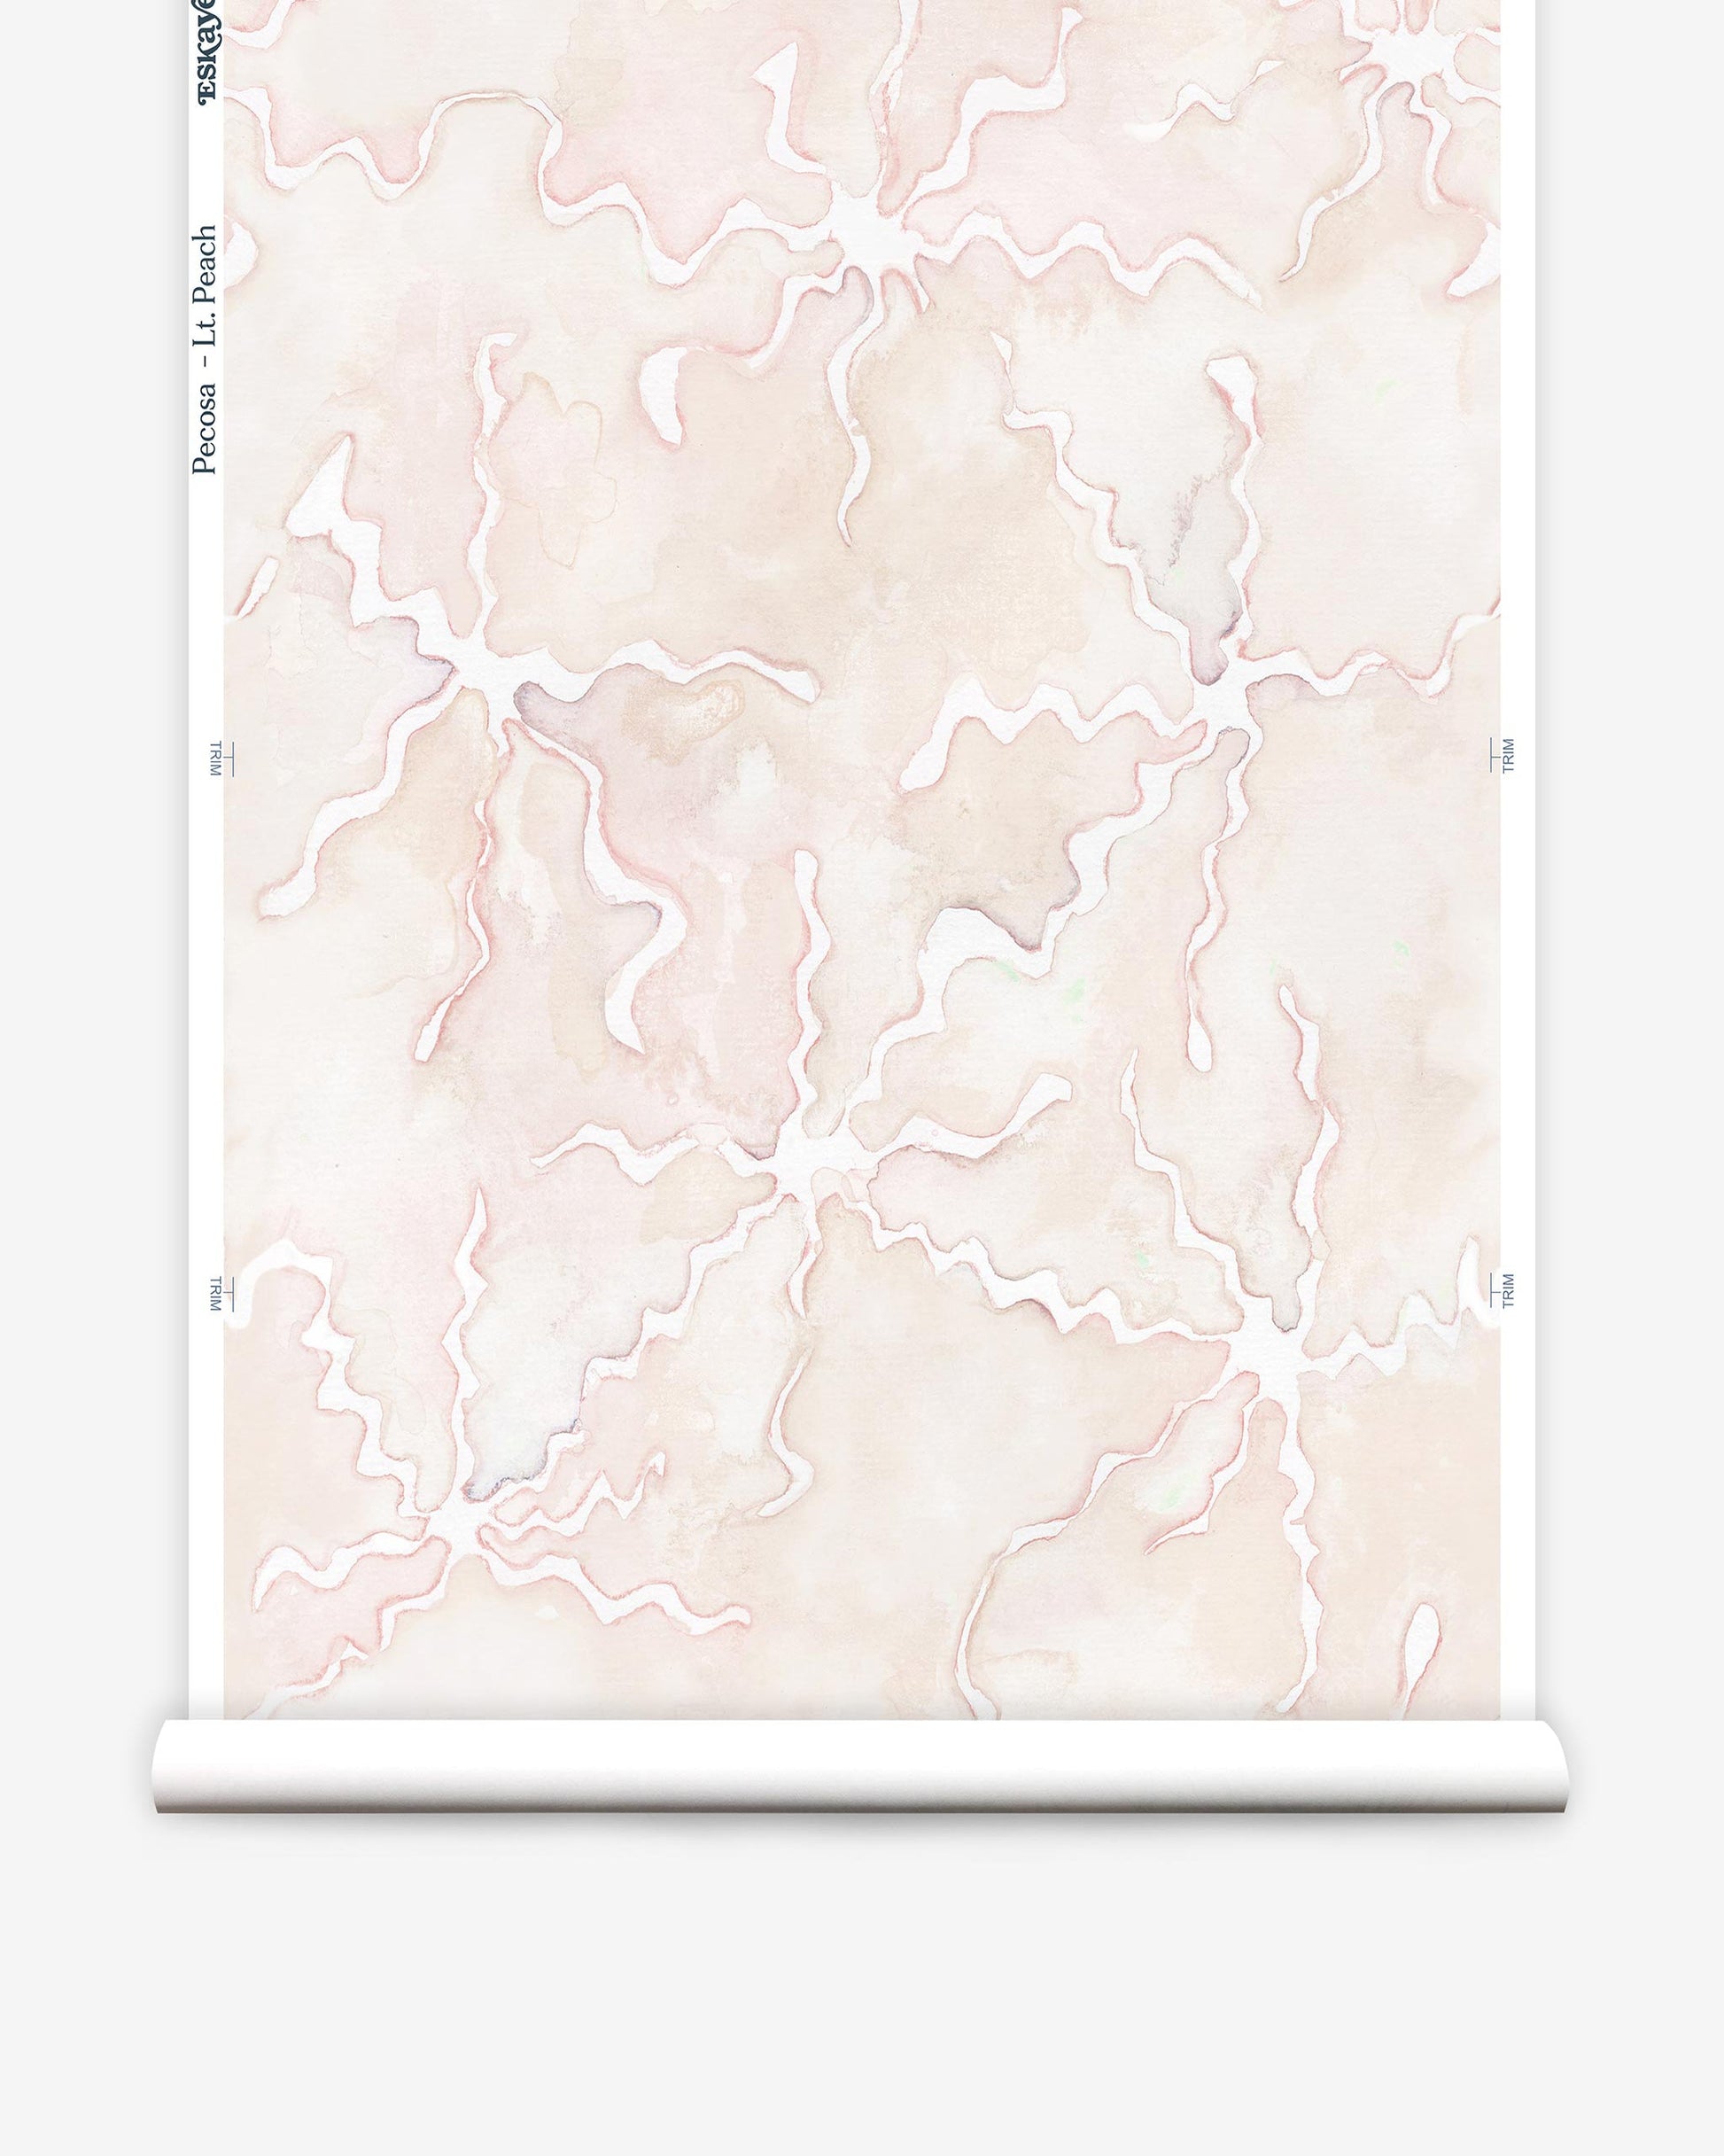 A roll of Pecosa Wallpaper Light Peach showcasing a pink and white pattern designed for fabric using resist dye techniques